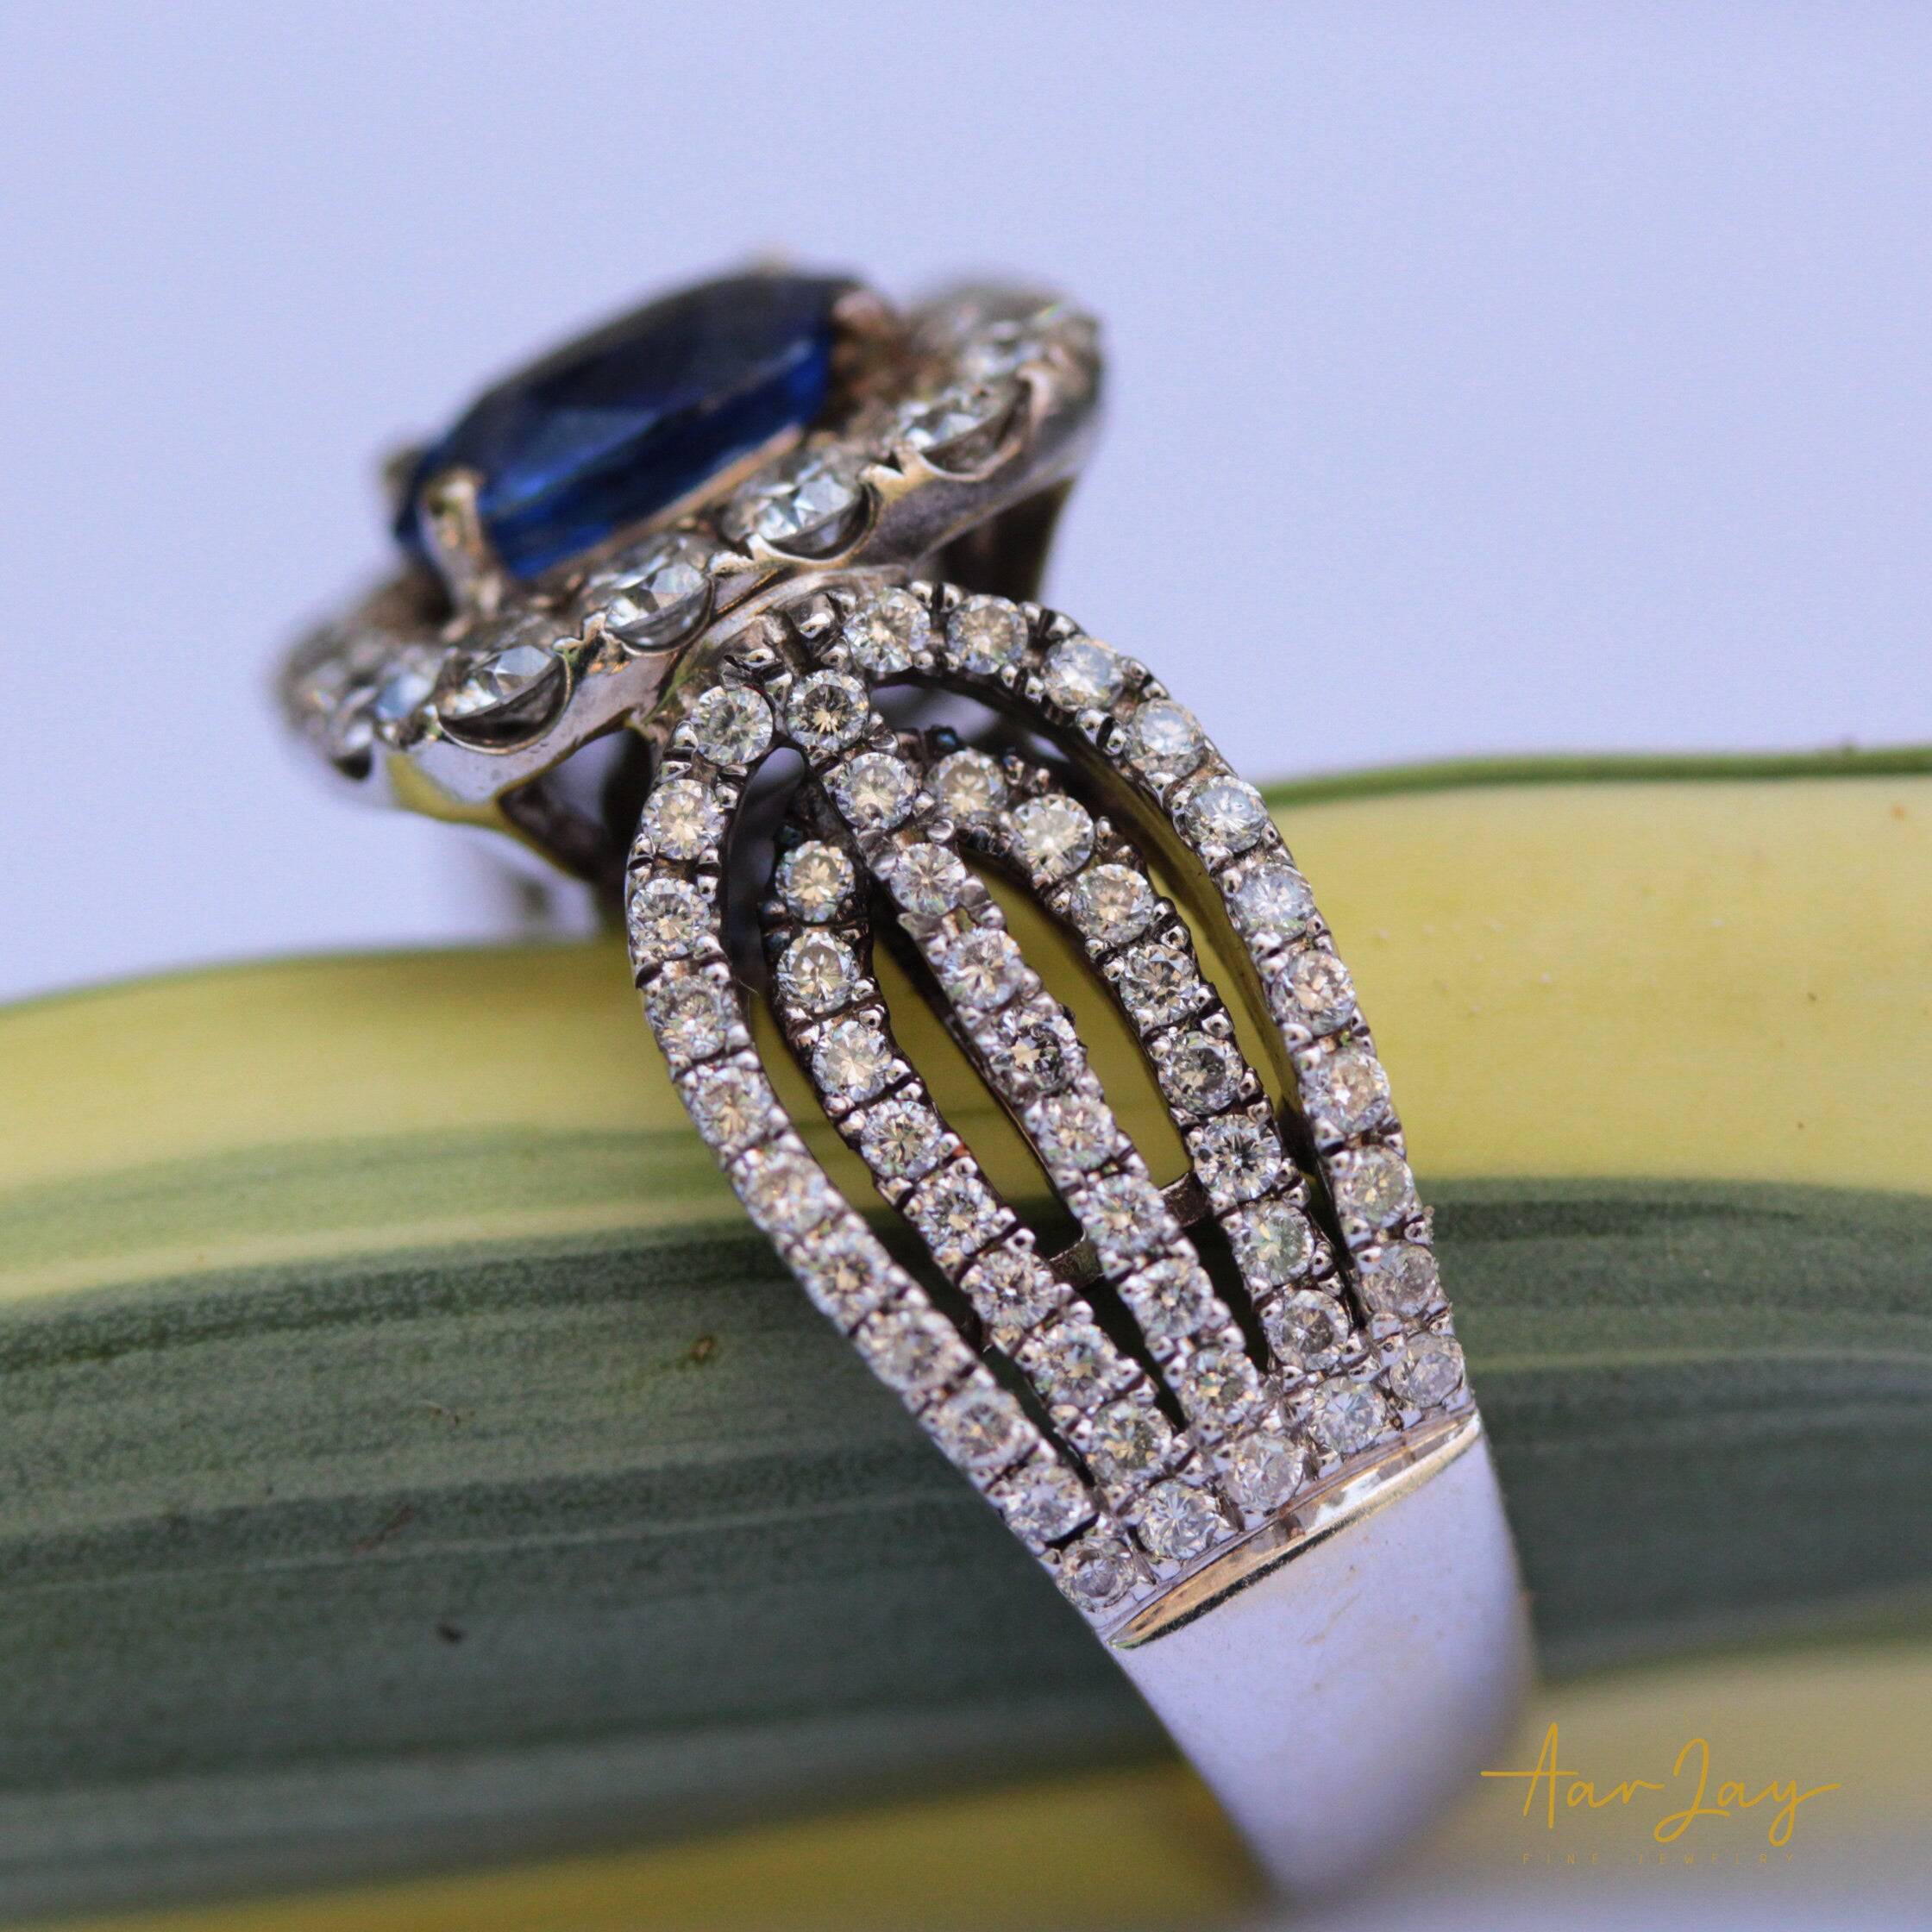 2.50 Cts Blue Sapphire Natural Diamonds in 14Kt White Gold Ring - (H) - Baza Boutique 